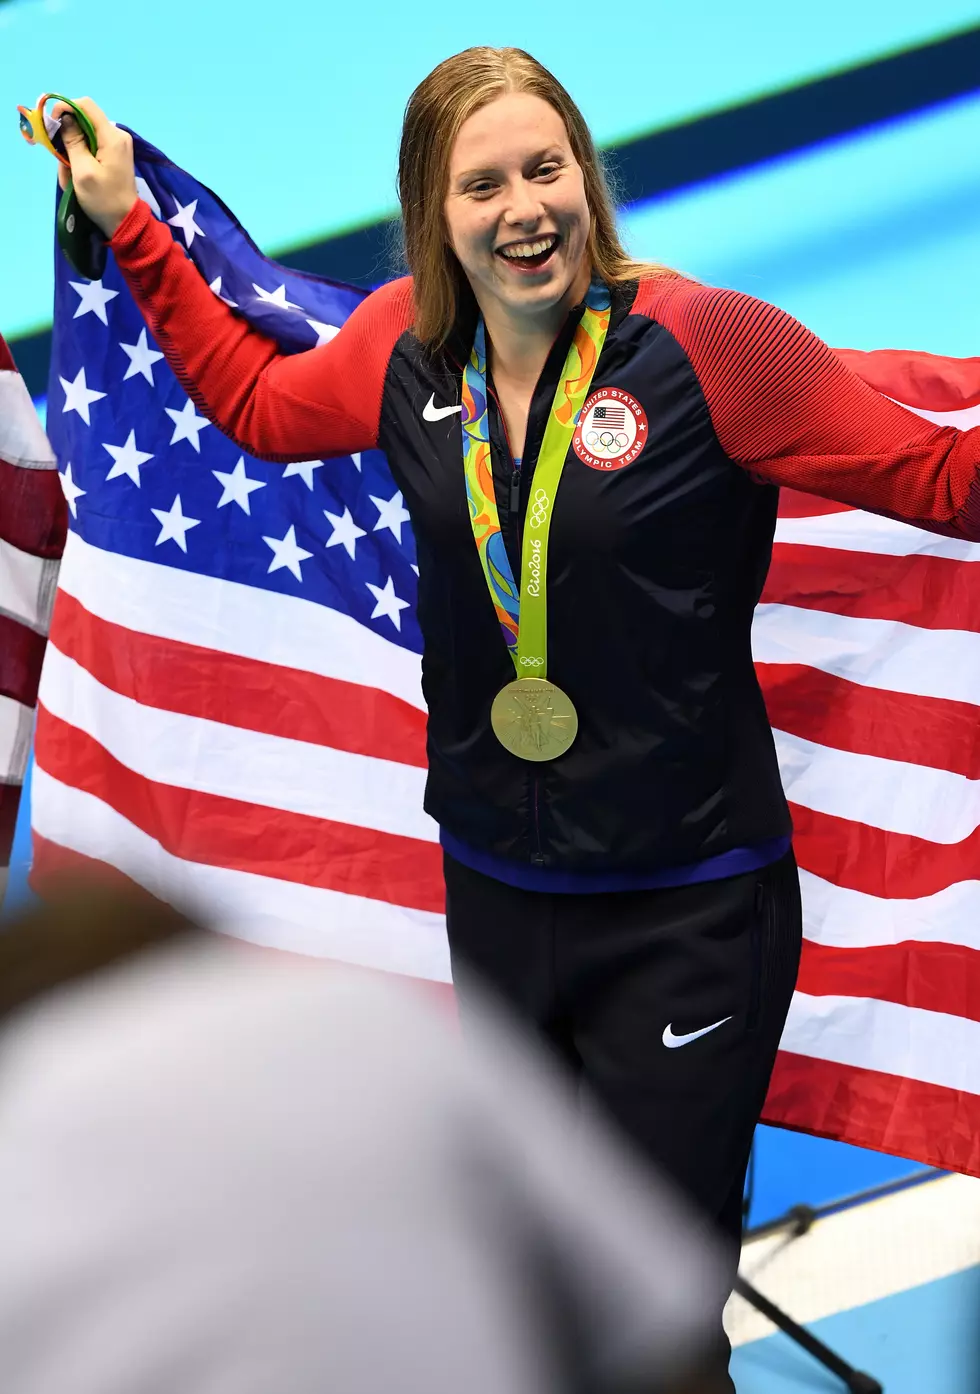 Evansville Otters Announce Appearance by Olympic Medalist Lilly King at Friday’s Home Game